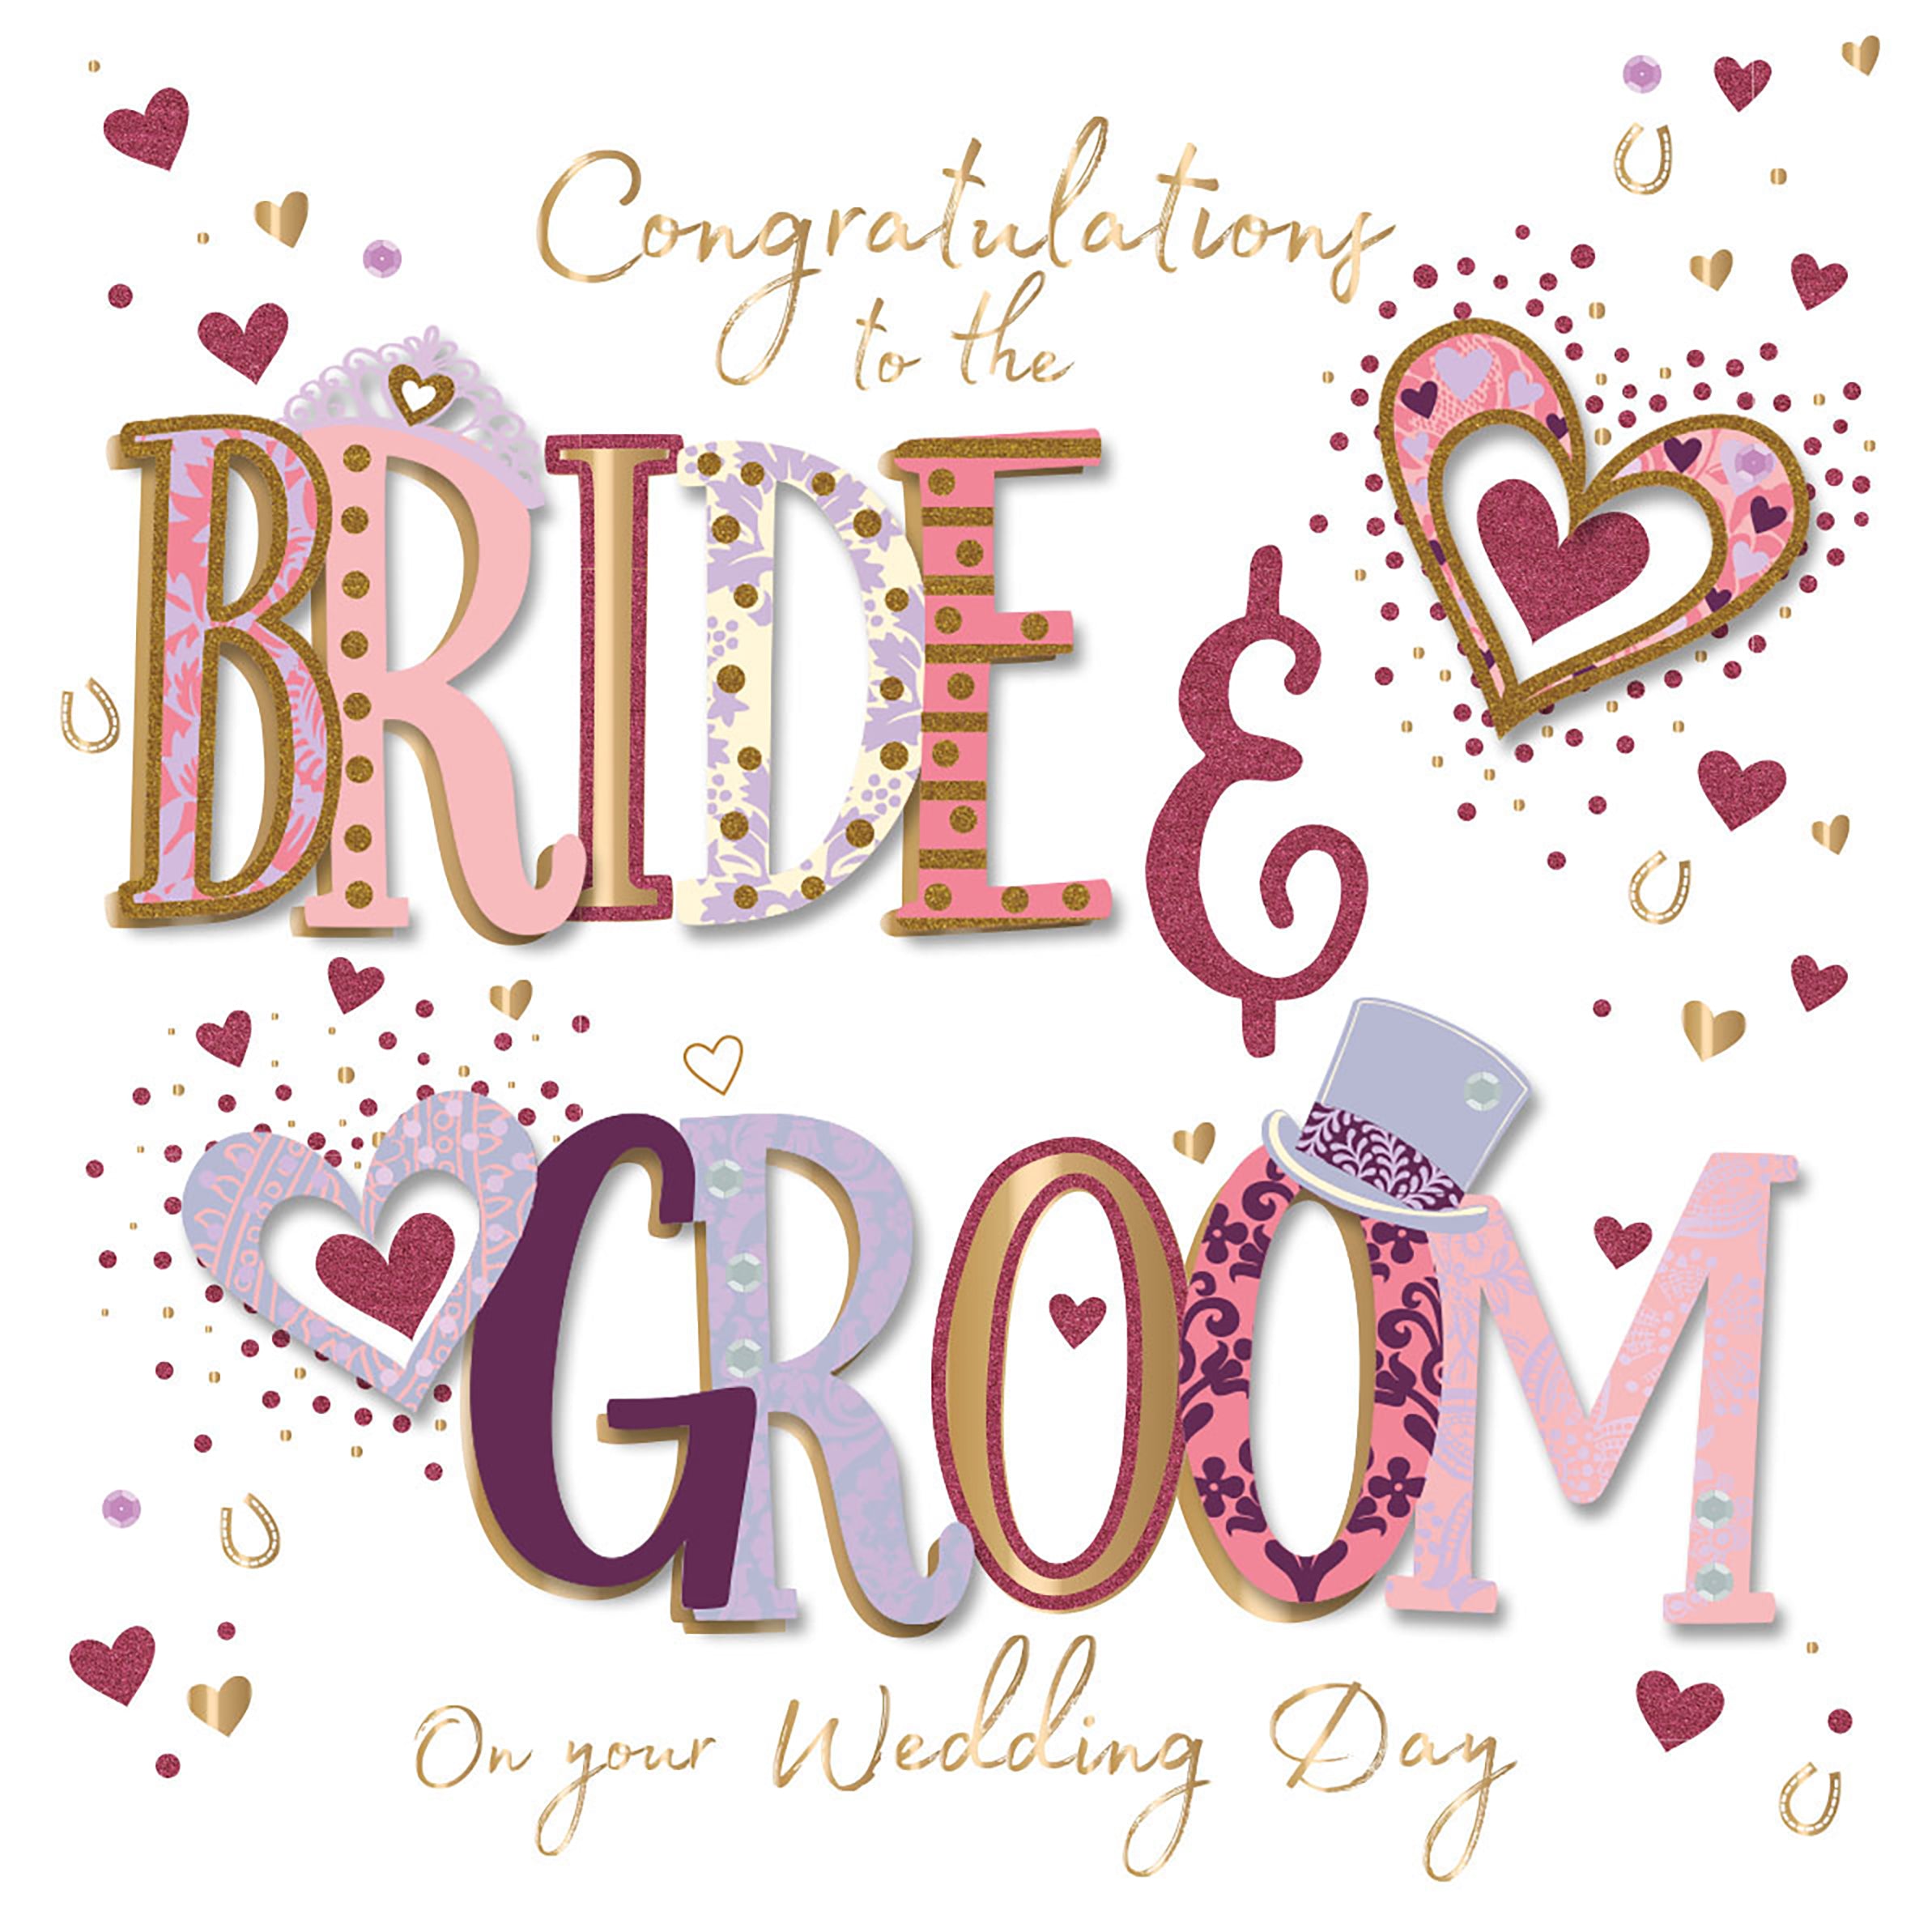 Congratulations Bride and Groom On Your Wedding Day Card